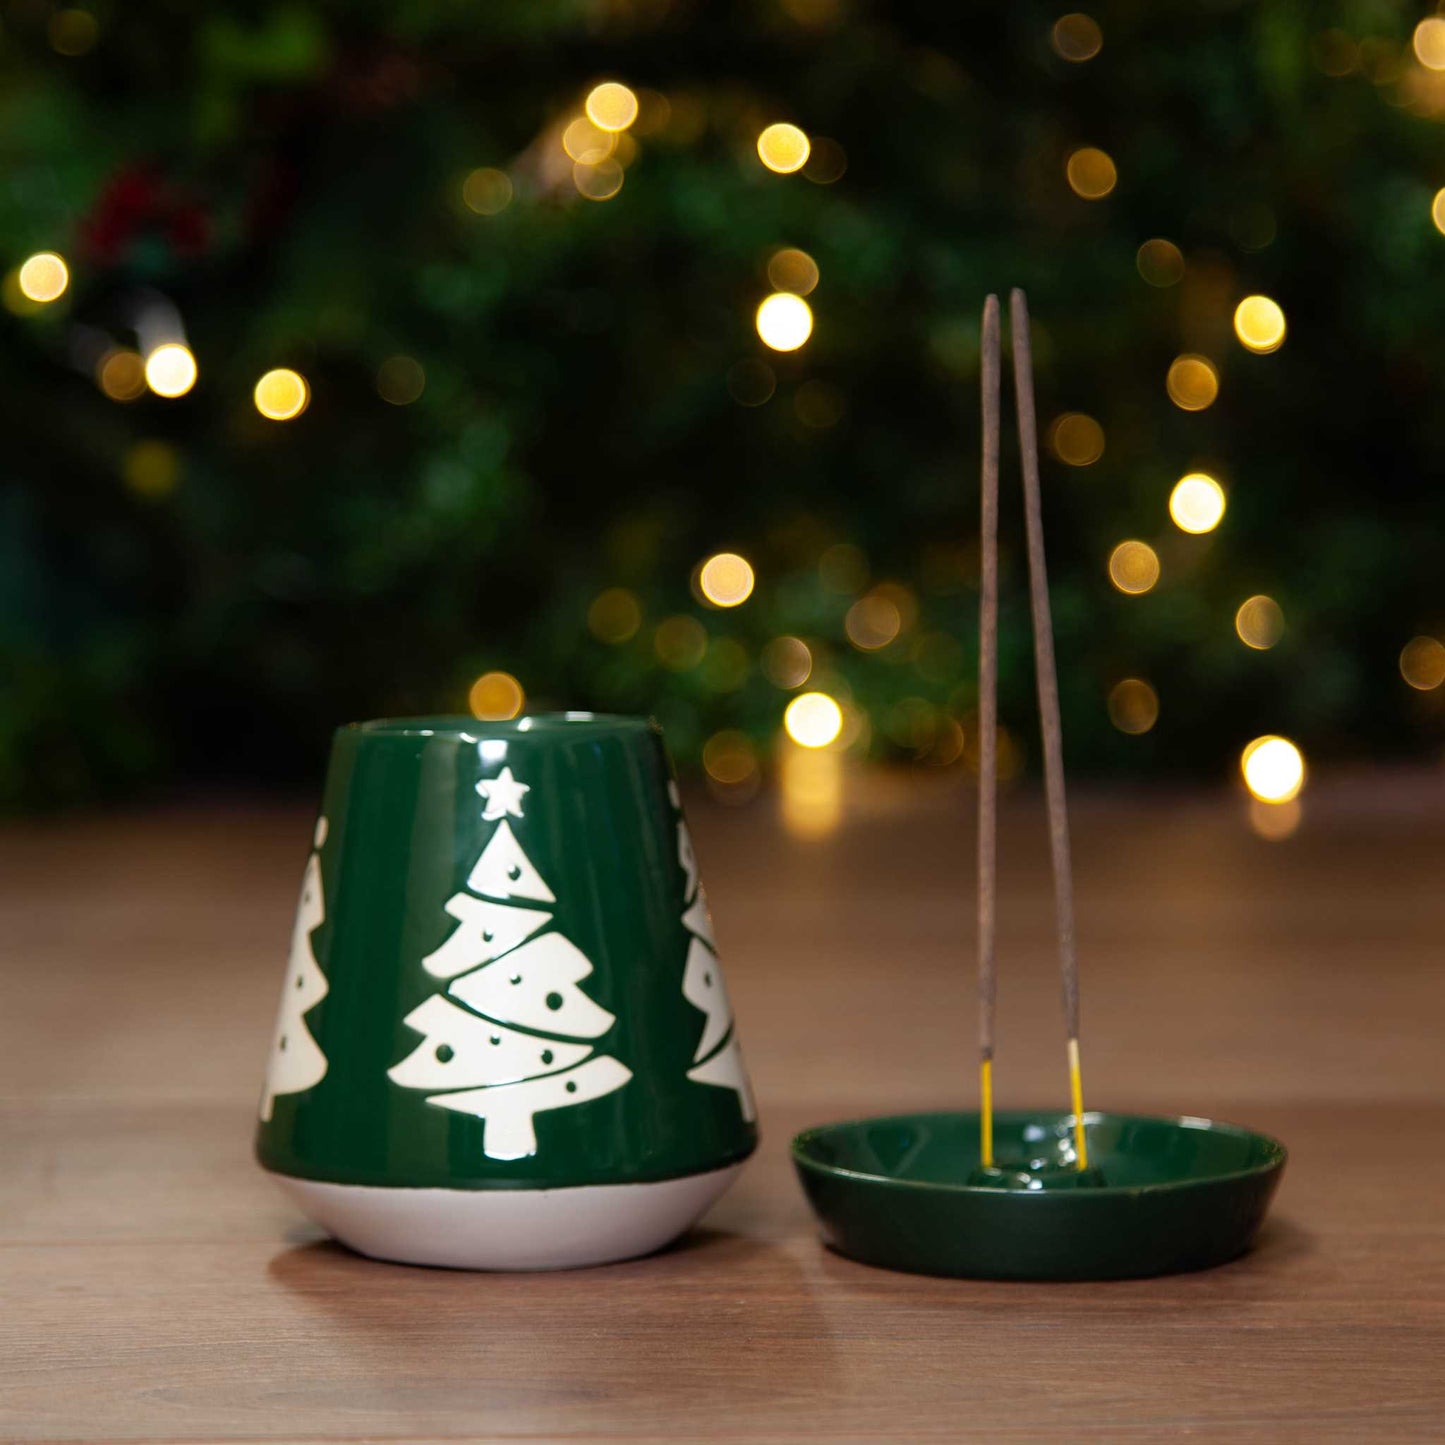 Puckator Home Fragrance Accessories Christmas Tree Green Glaze Relief Stoneware Incense Burner